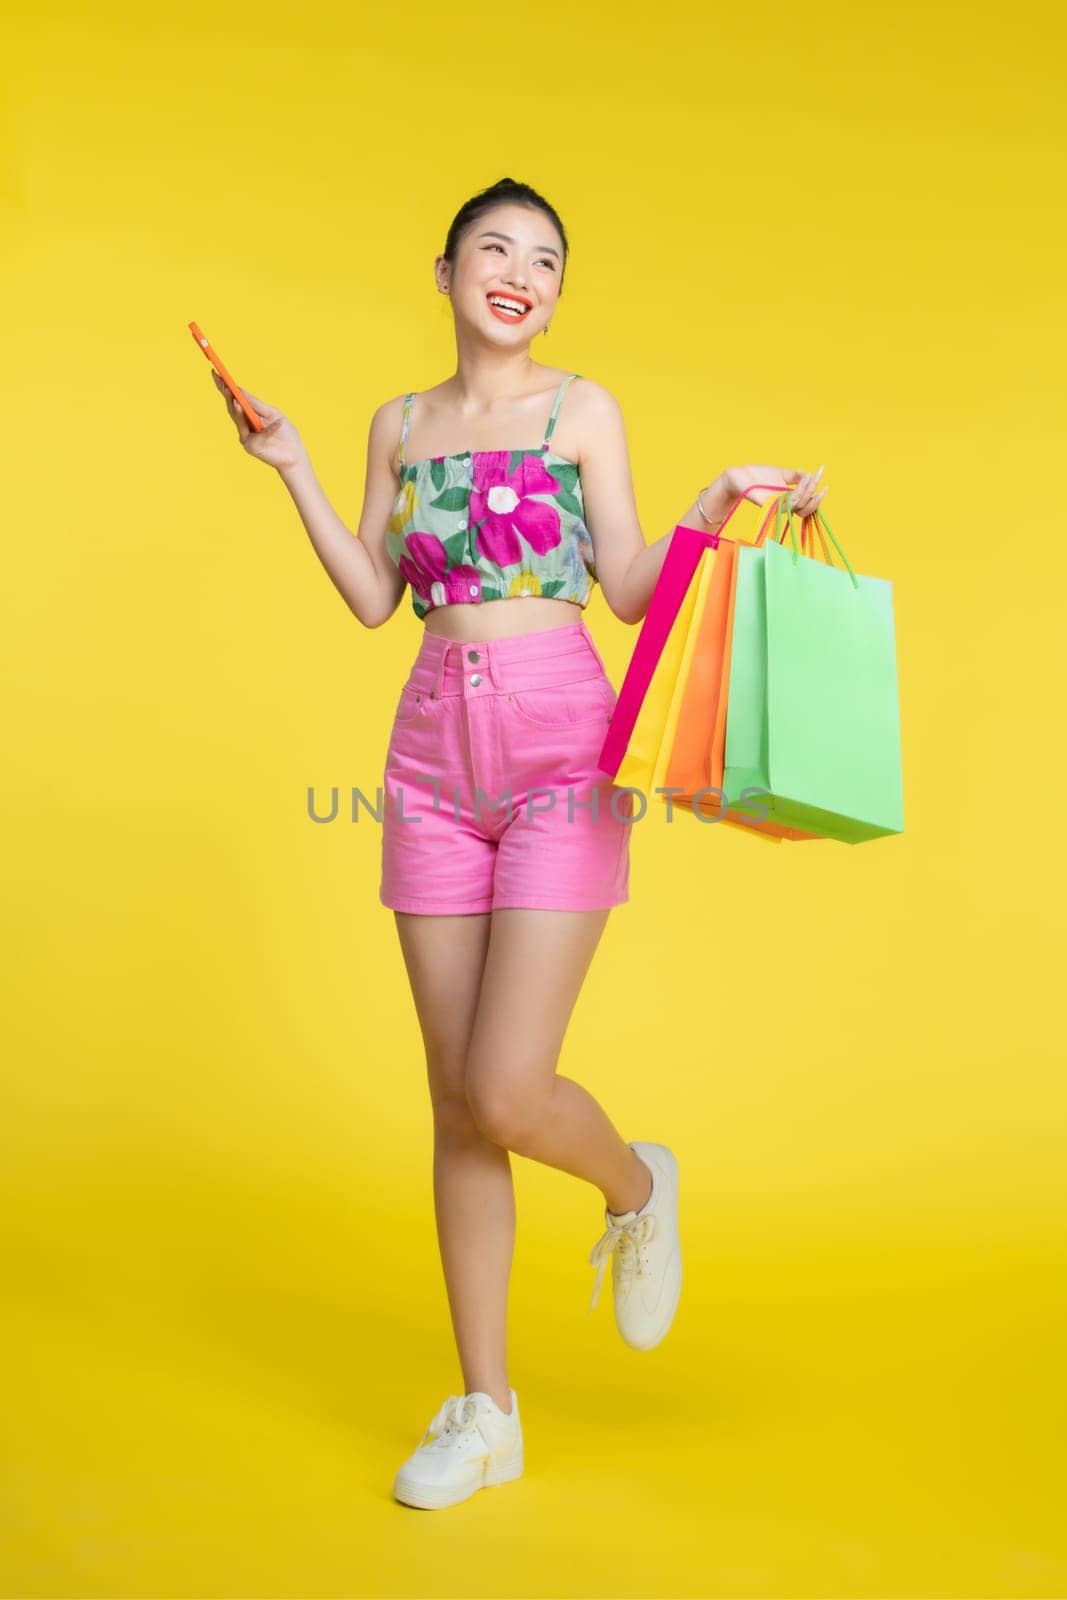 Young Asian woman holding mobile phone and shopping bags, smiling face, cheerful figure  by makidotvn